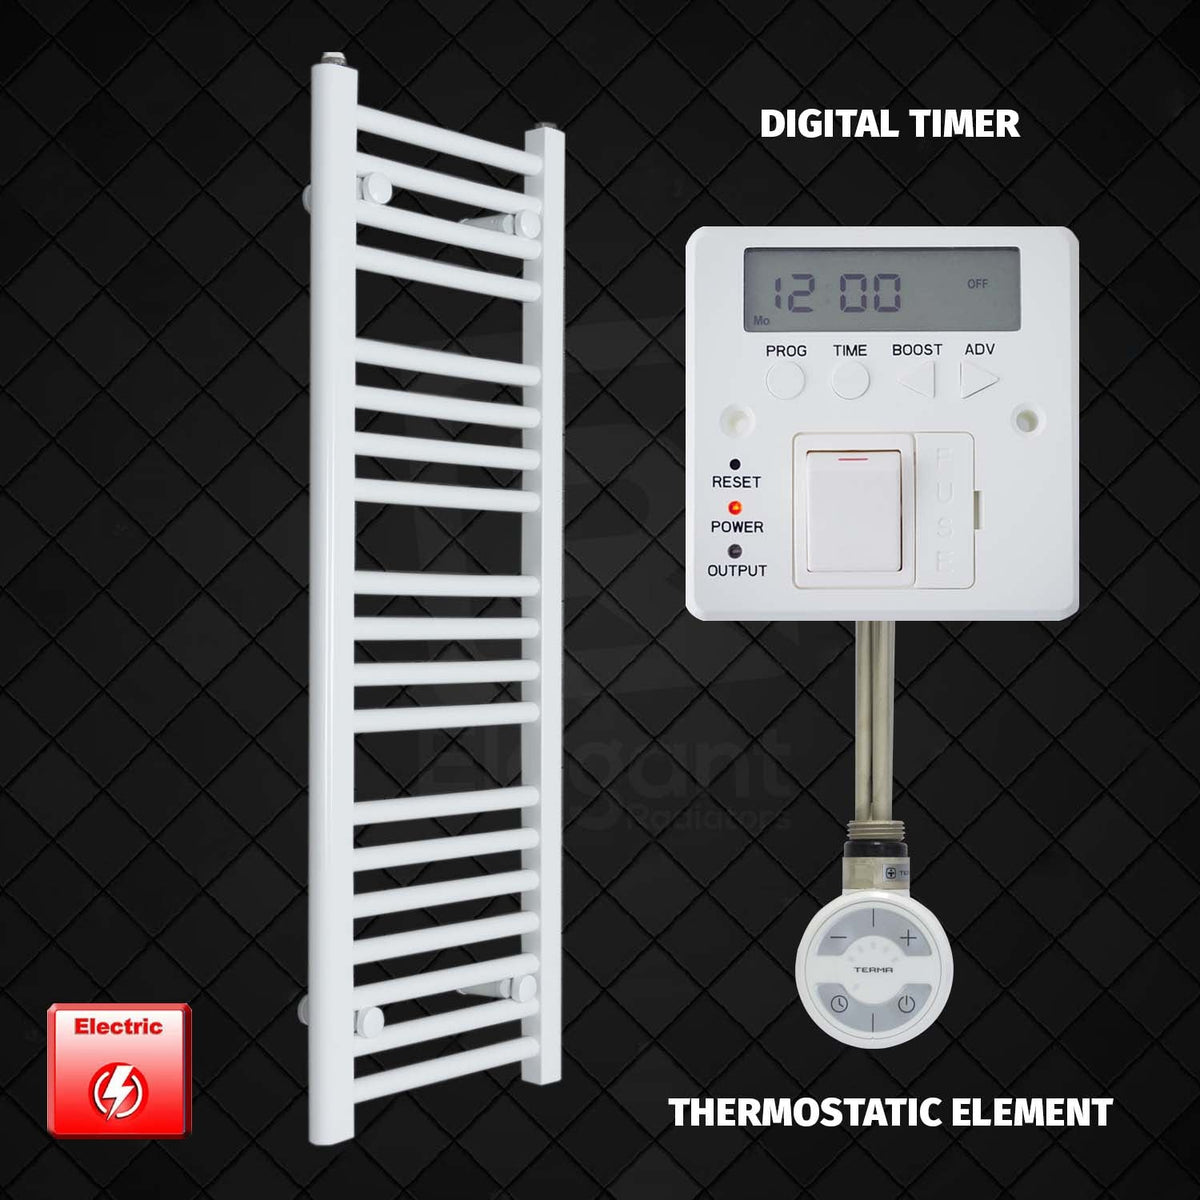 1000 mm High 300 mm Wide Pre-Filled Electric Heated Towel Rail Radiator White HTR MOA Digital Timer Thermostatic Element